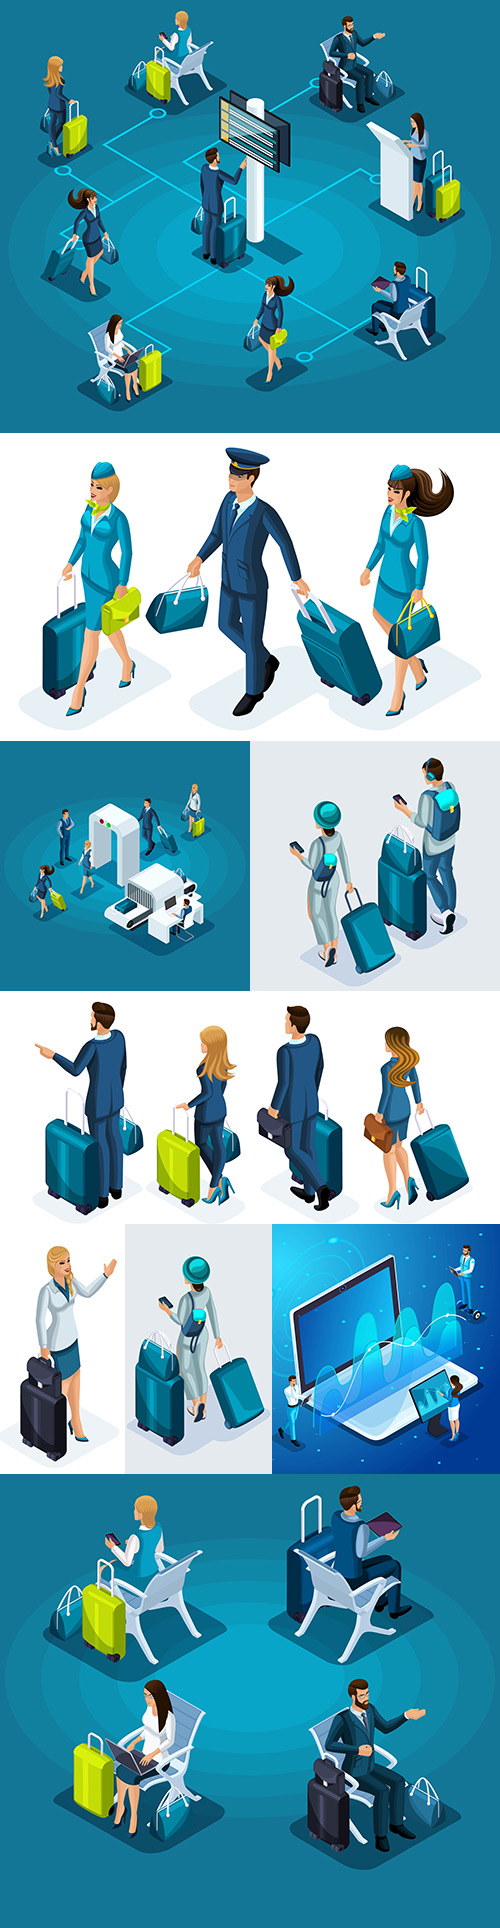 Girl and man at airport with suitcases isometric illustrations
